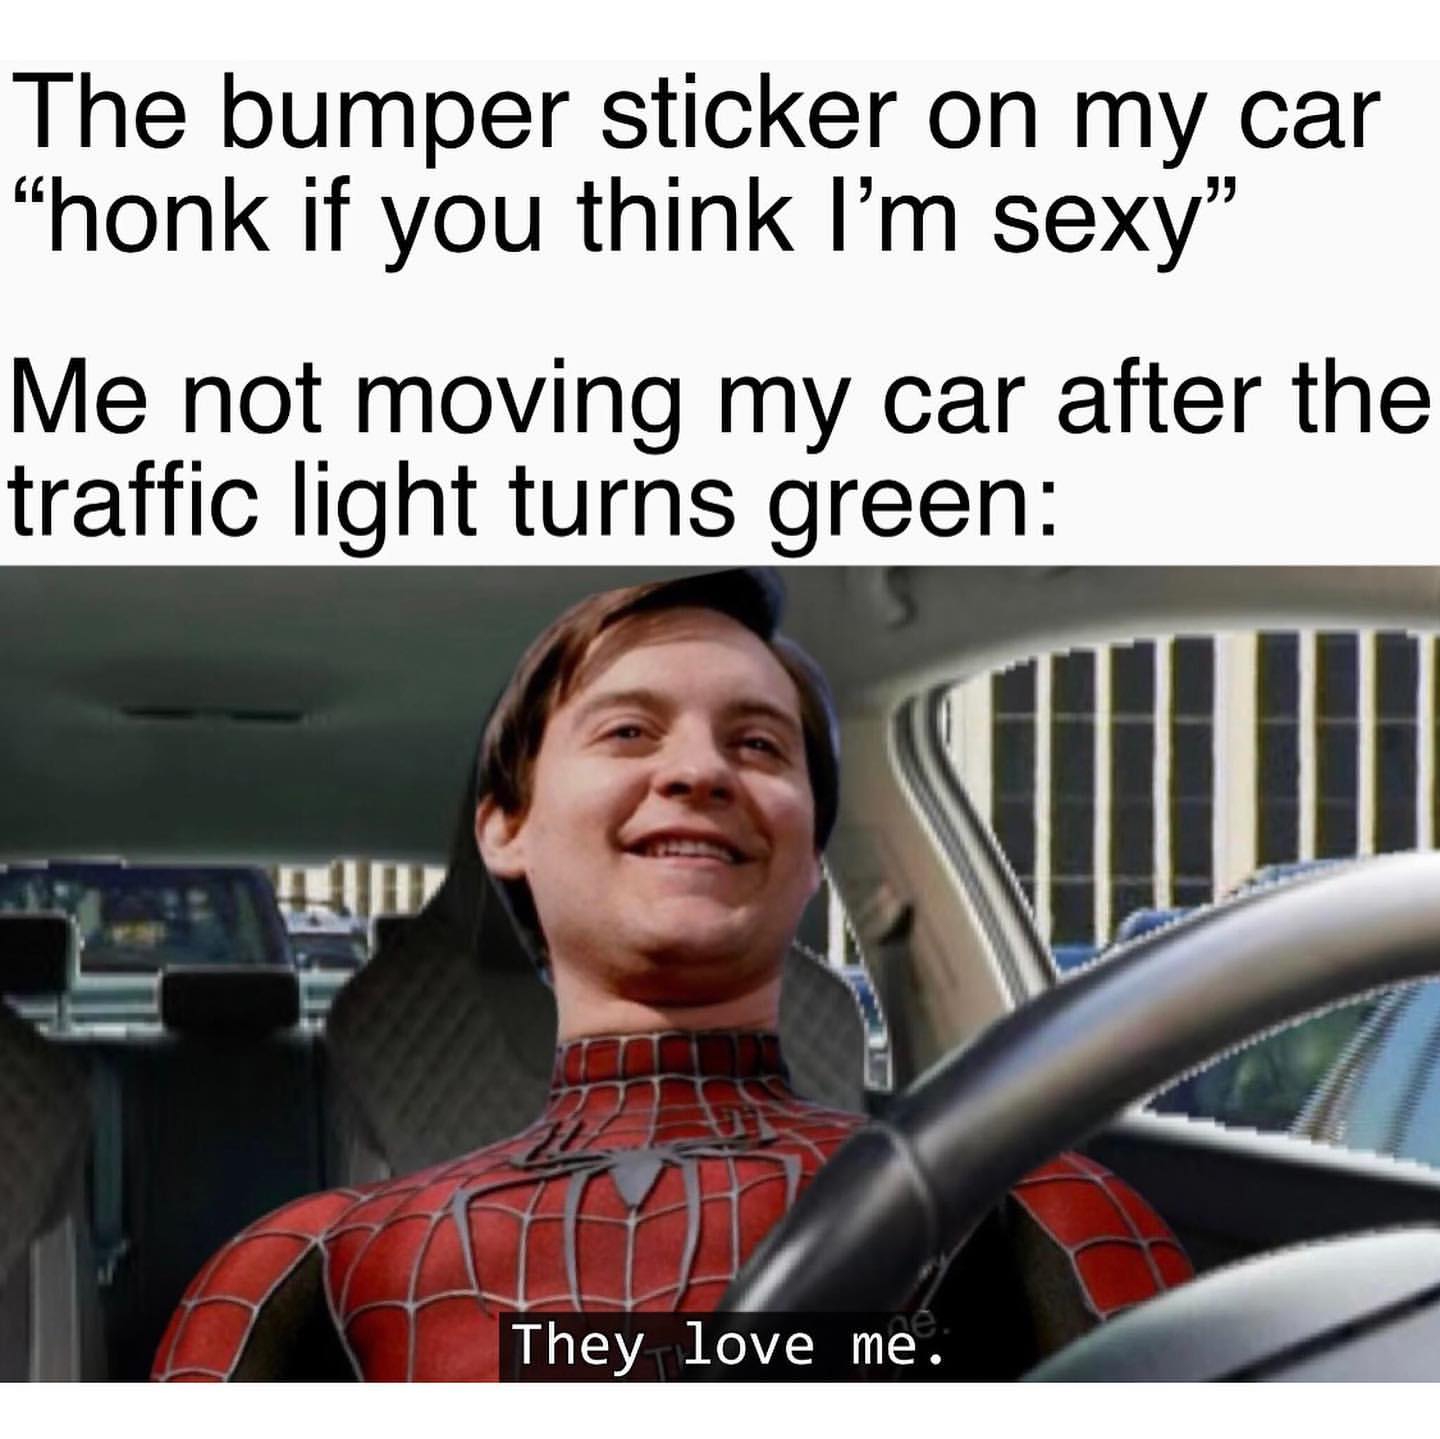 The bumper sticker on my car "honk if you think I'm sexy" Me not moving my car after the traffic light turns green: They love me.